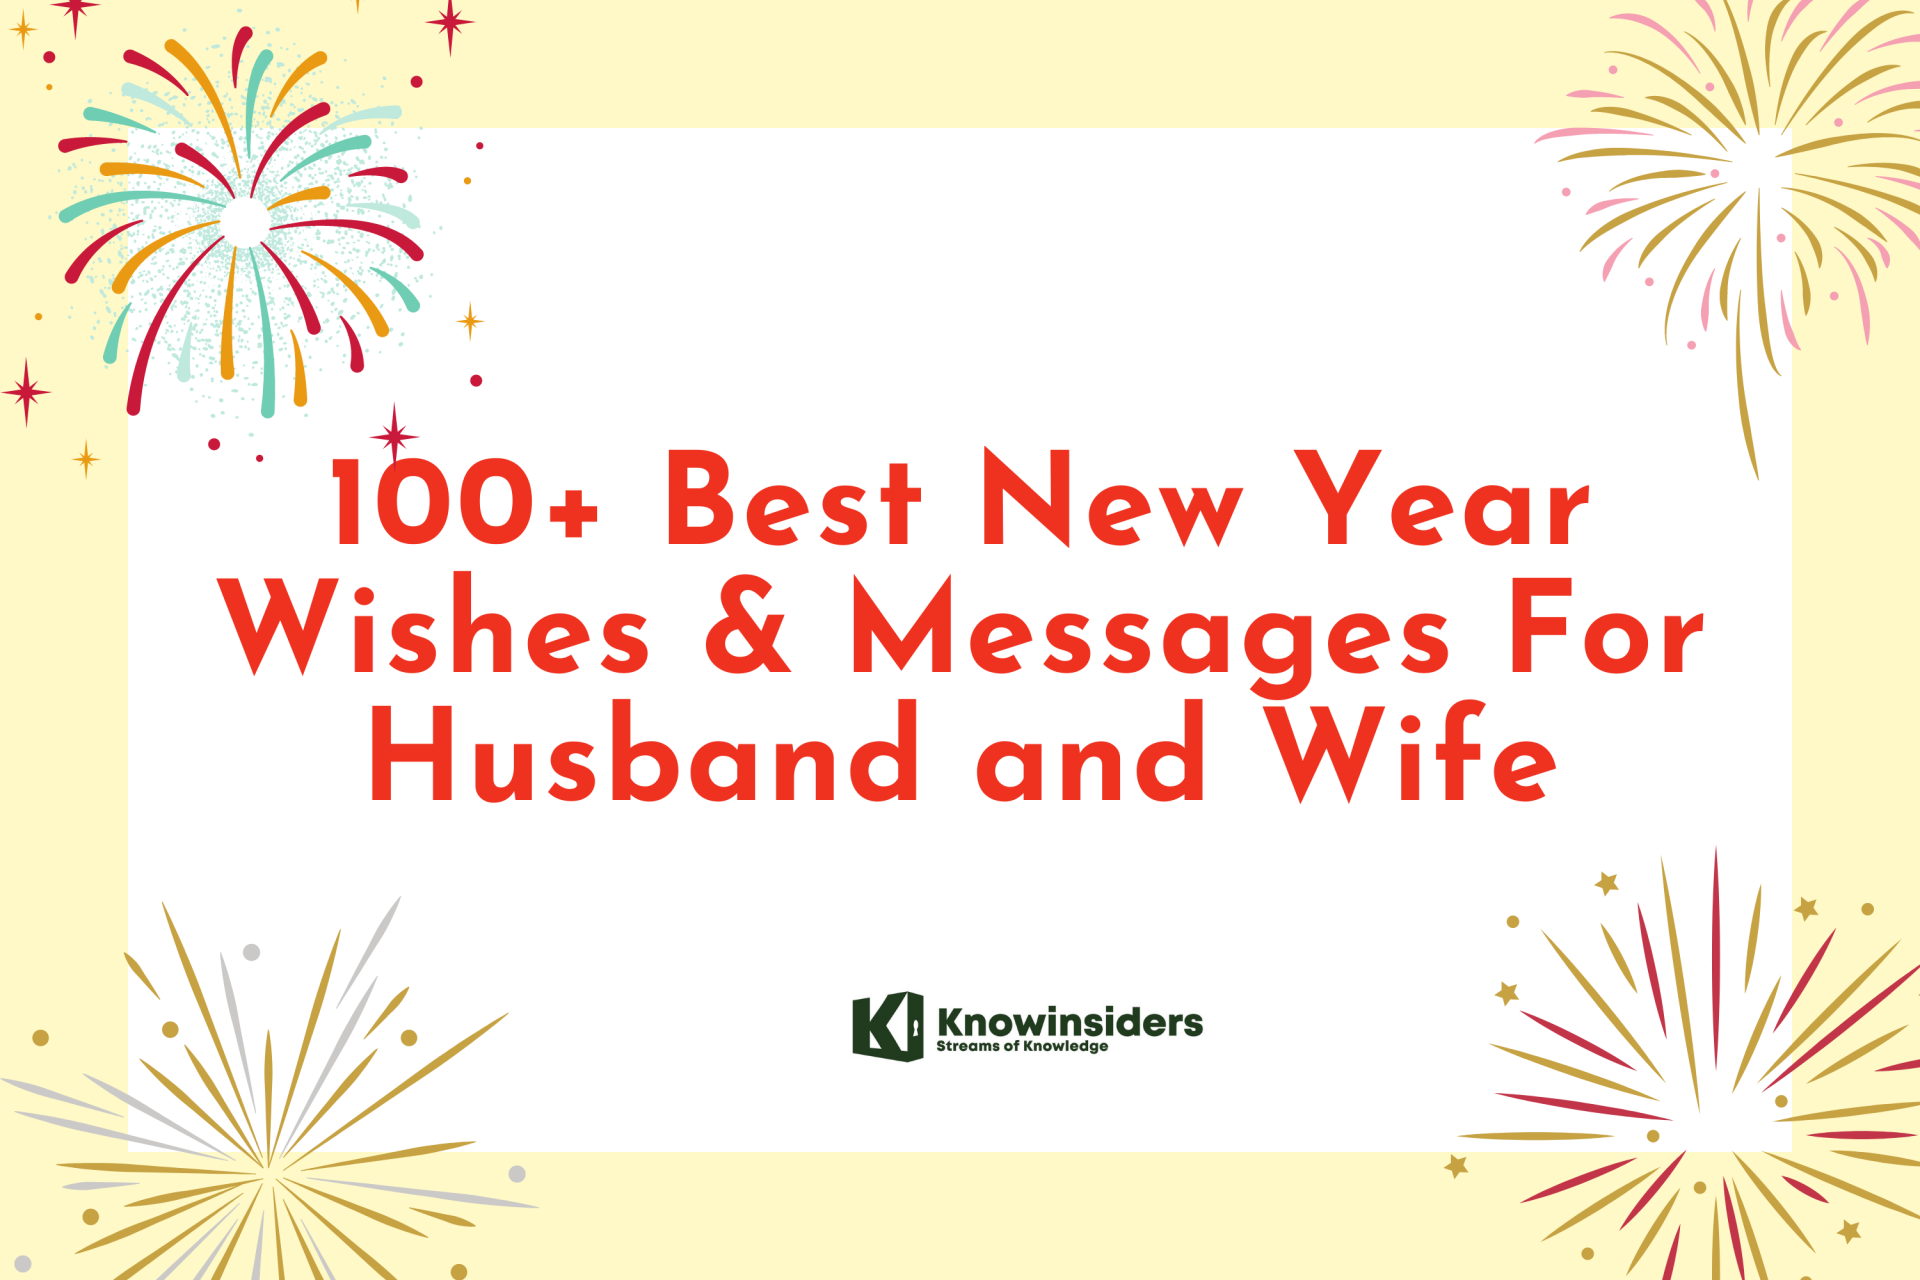 100+ Sweetest New Year Wishes & Messages For Husband and Wife